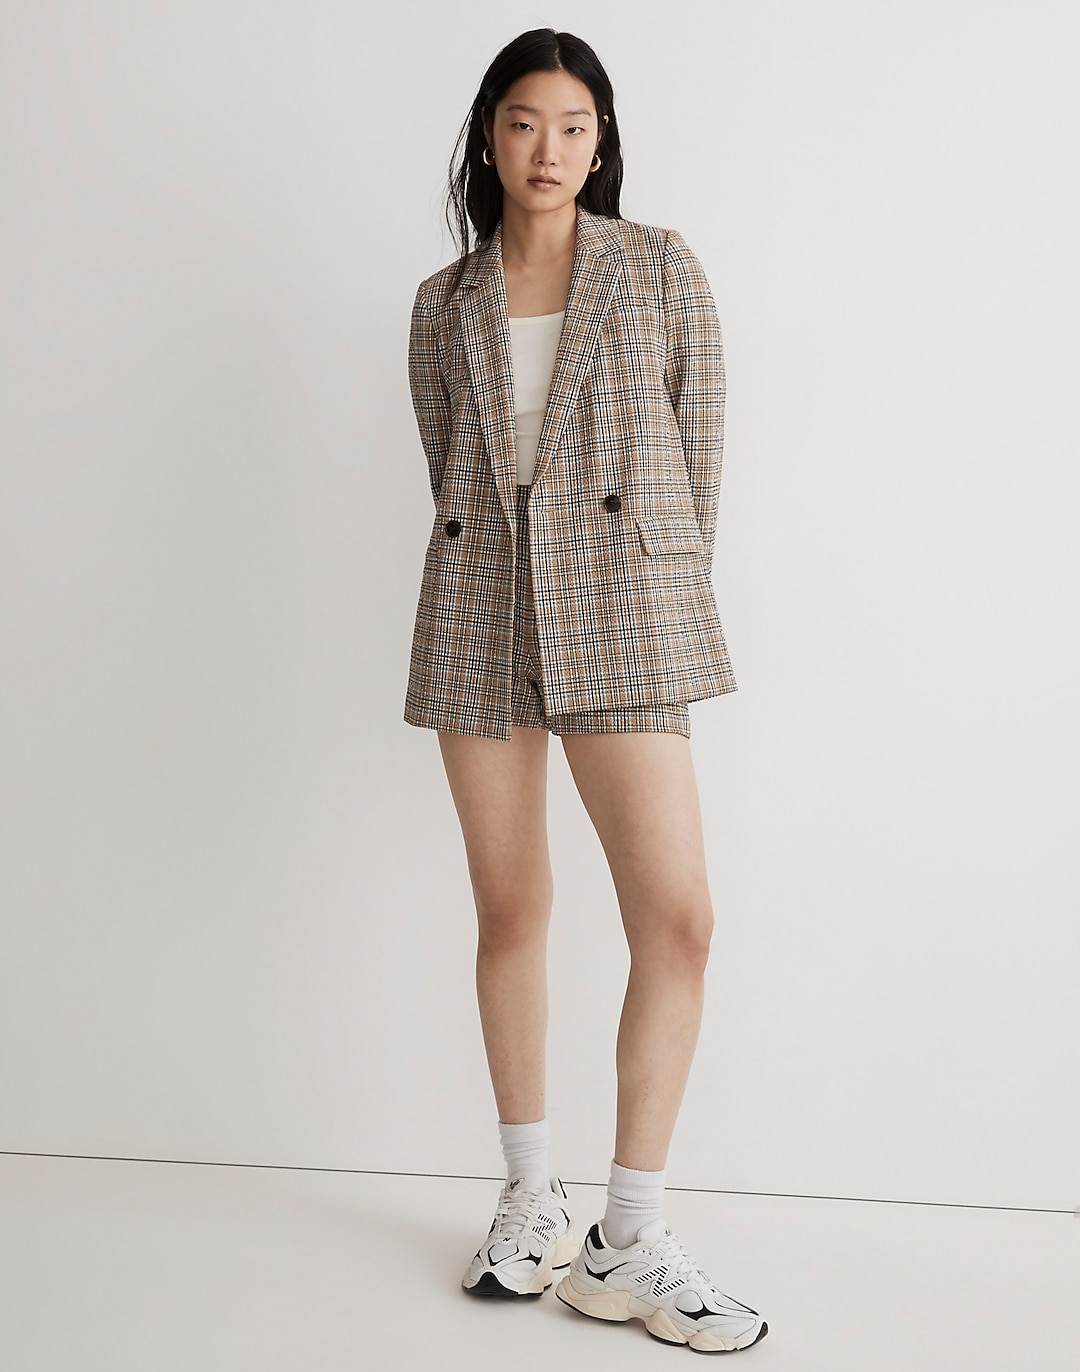 Caldwell Double-Breasted Blazer in Prejean Plaid | Madewell